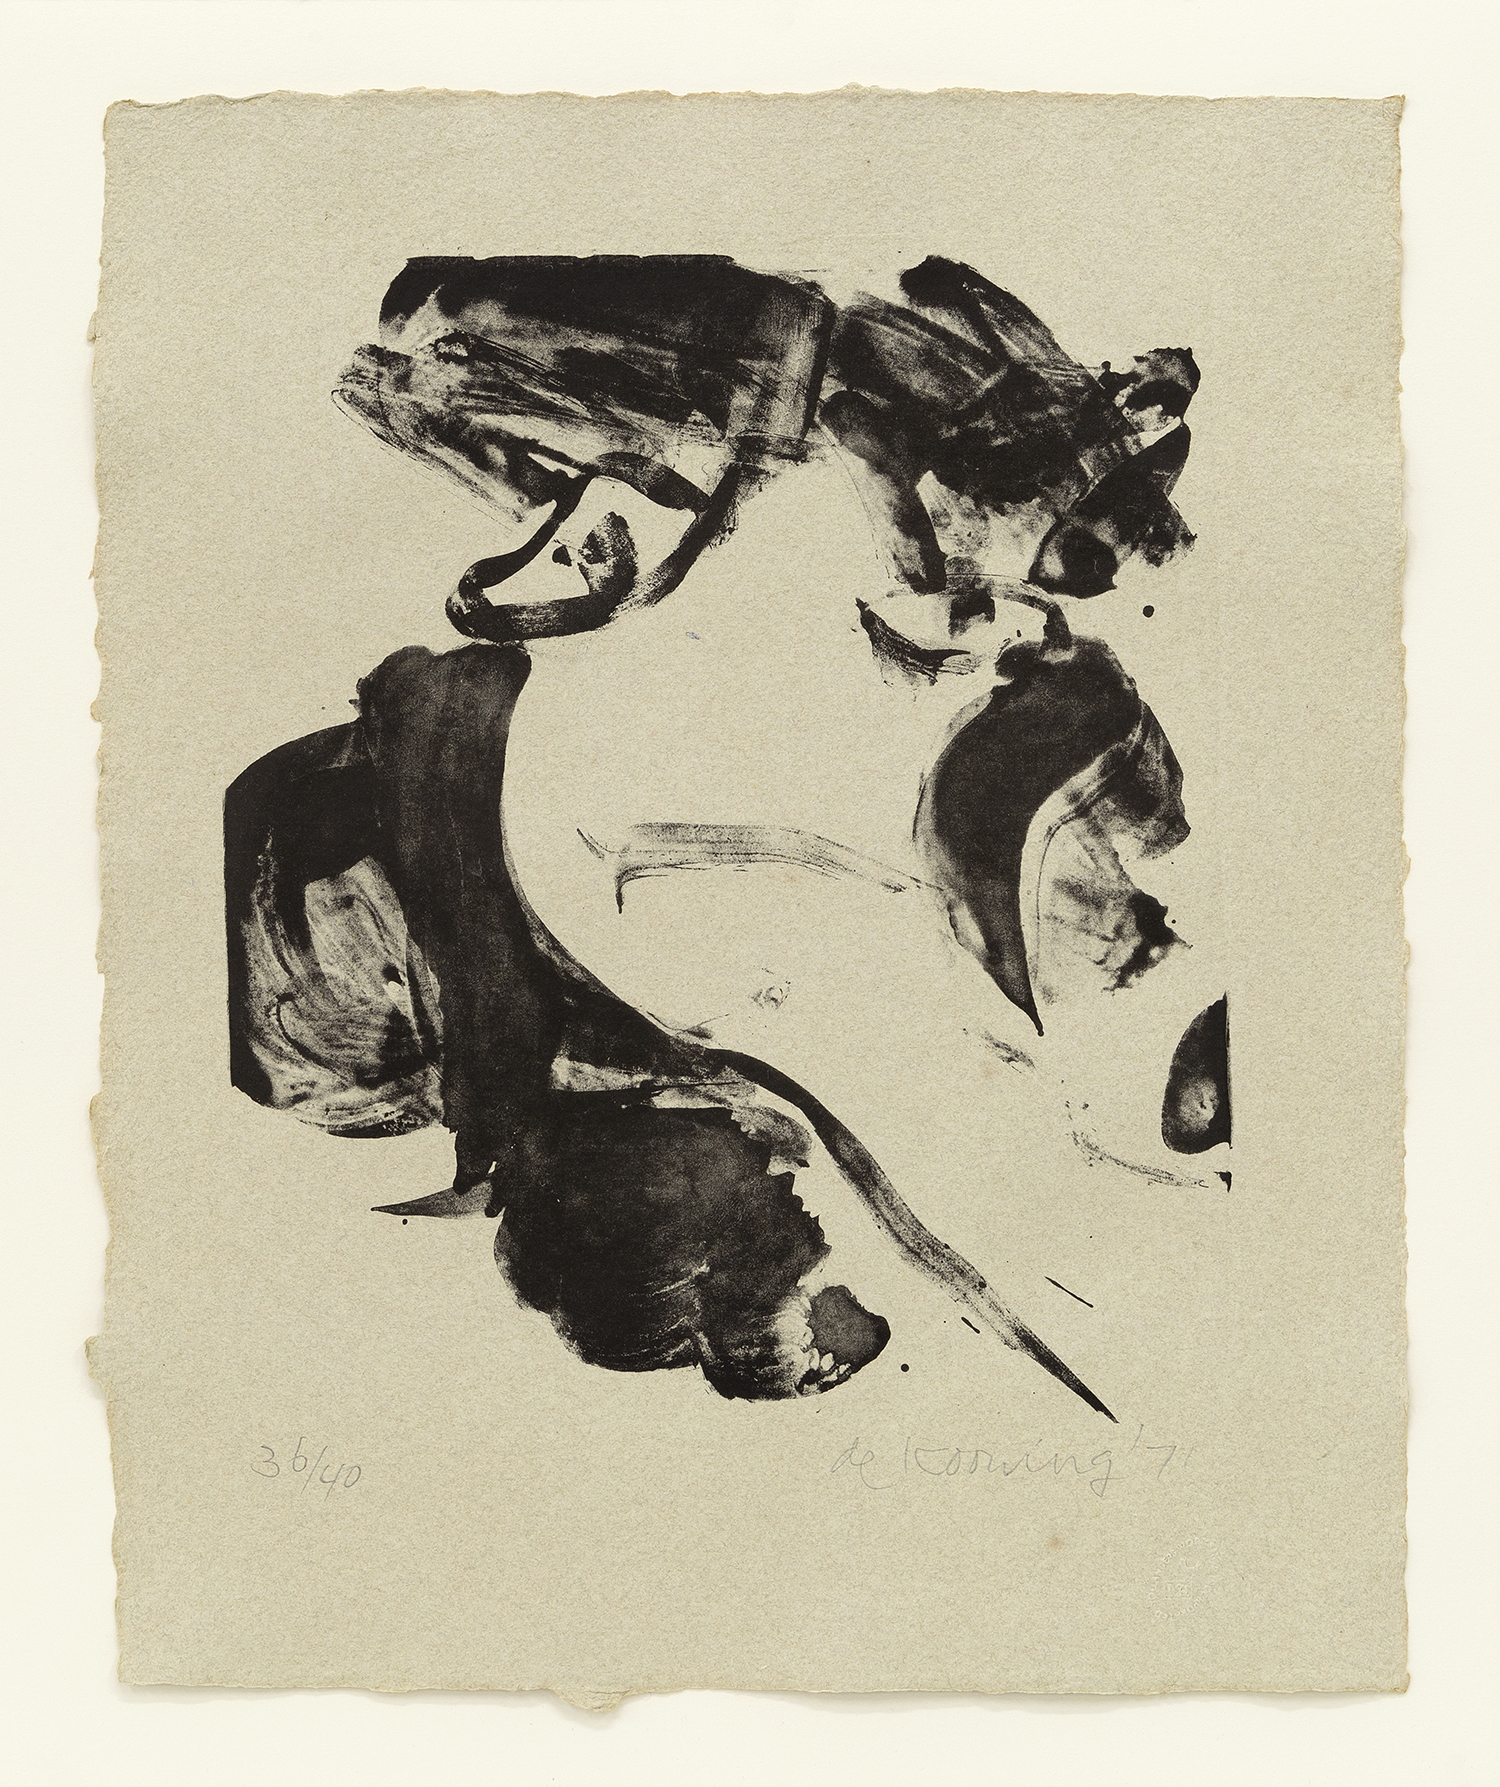 With Love, 1971, Lithograph, 11 1/4 x 9 3/4 inches (28.6 x 24.8 cm), Edition of 40